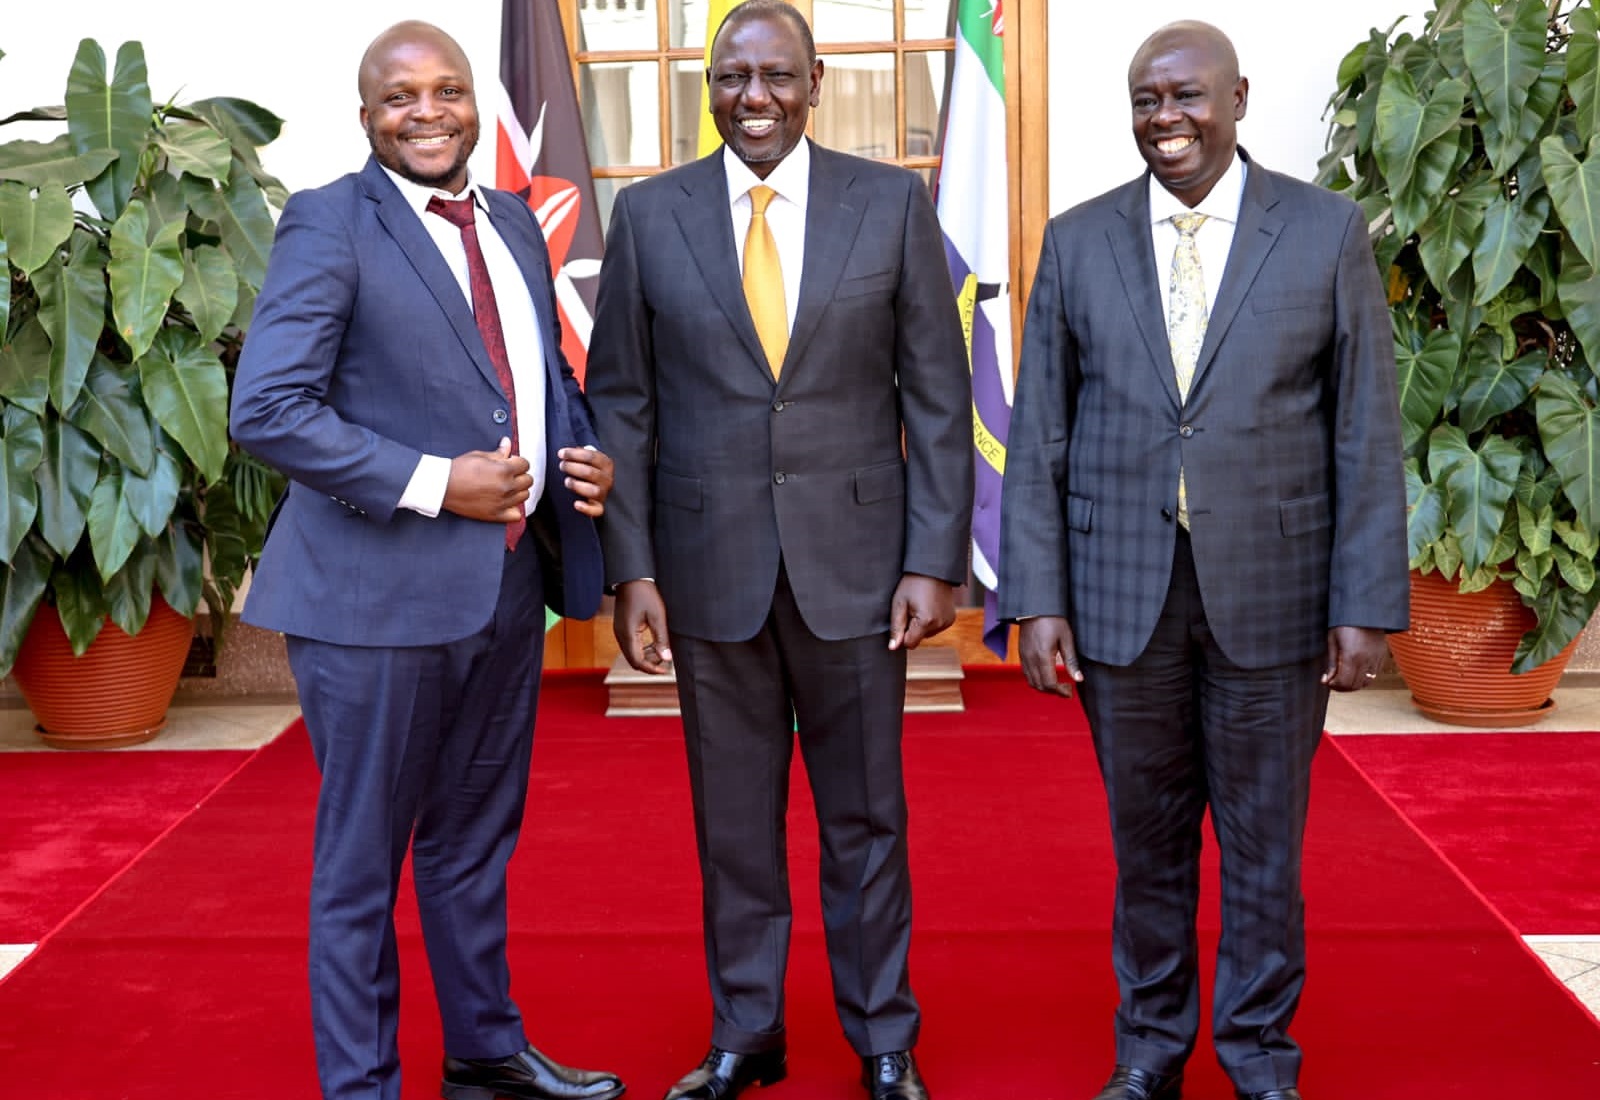 Azimio leaders meet with president William Ruto in Statehouse